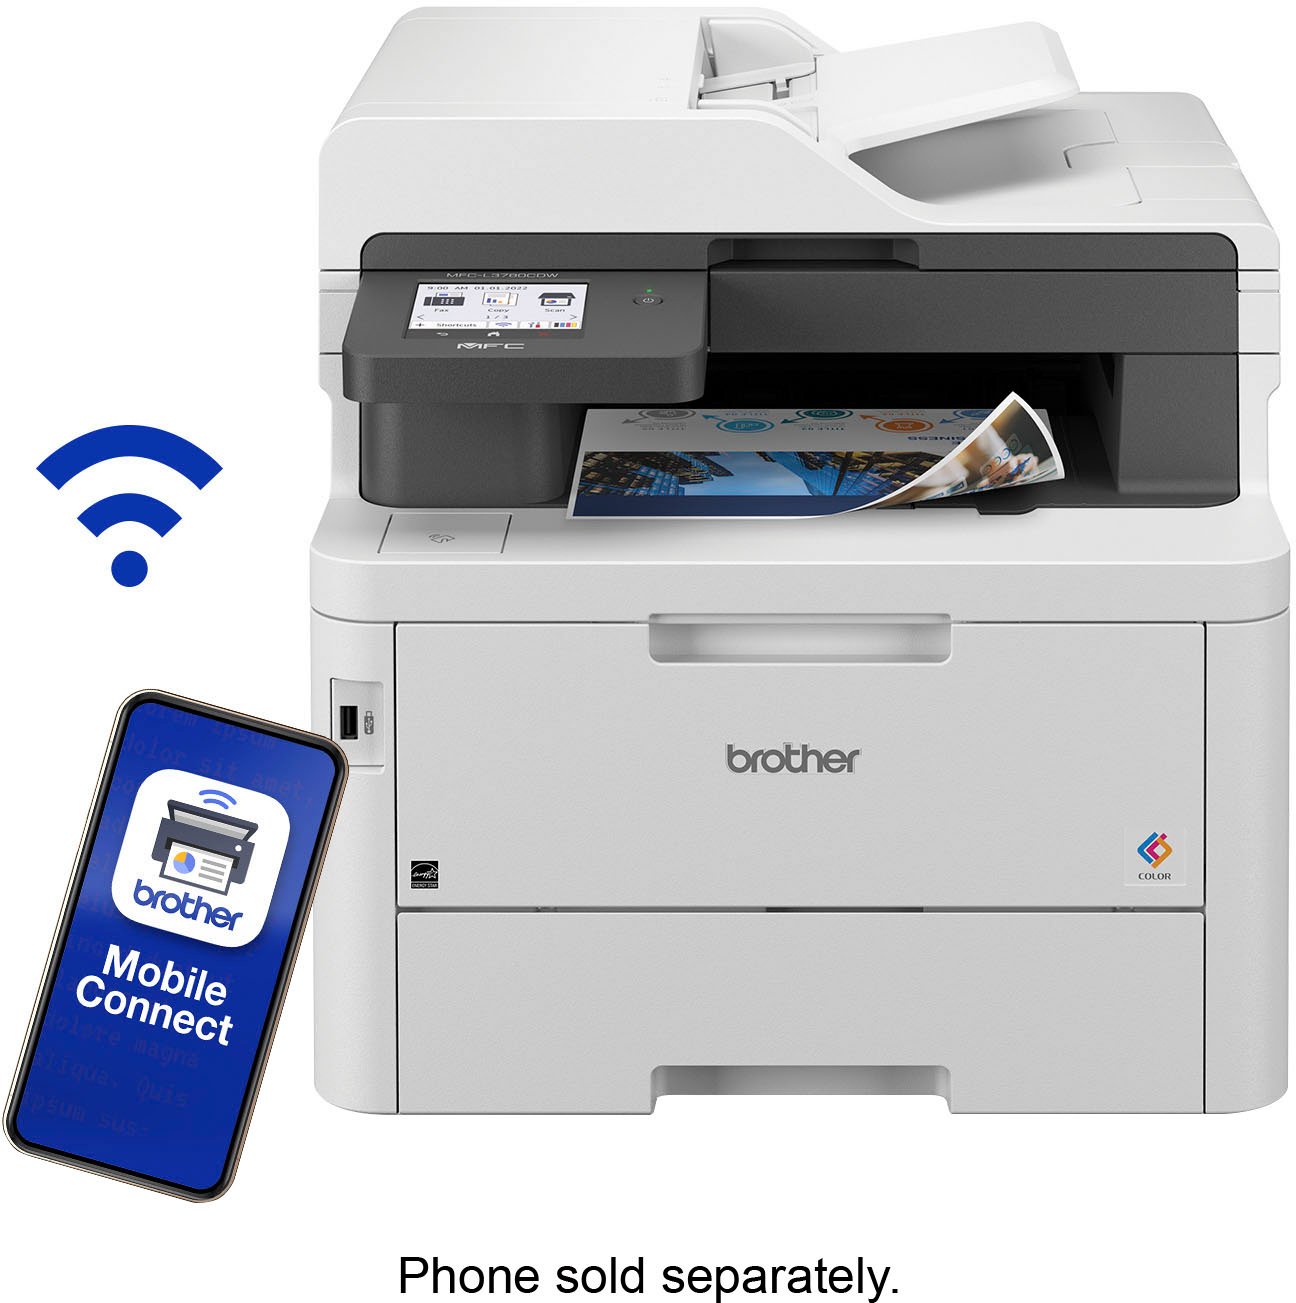 Brother MFC-L2750DW Compact Laser All-in-One Printer w/ Single